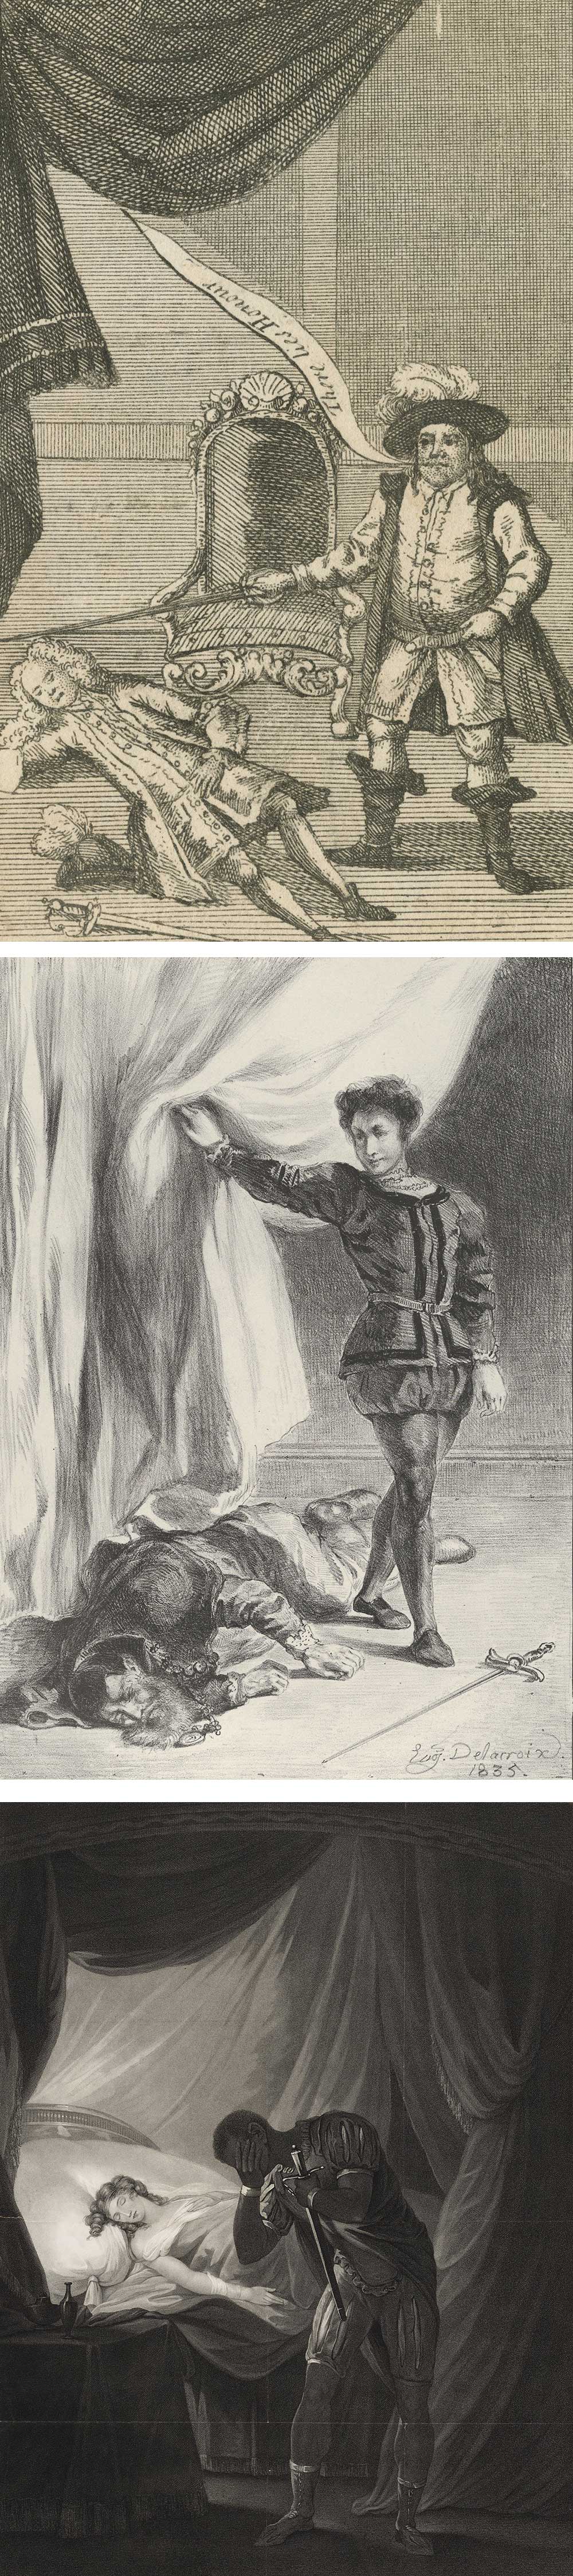 Top: Falstaff standing over Hotspur with a sword. Middle: Hamlet pulling the curtain back to reveal Polonius. Bottom: Othello covering his face as he stands over Desdemona asleep in bed.